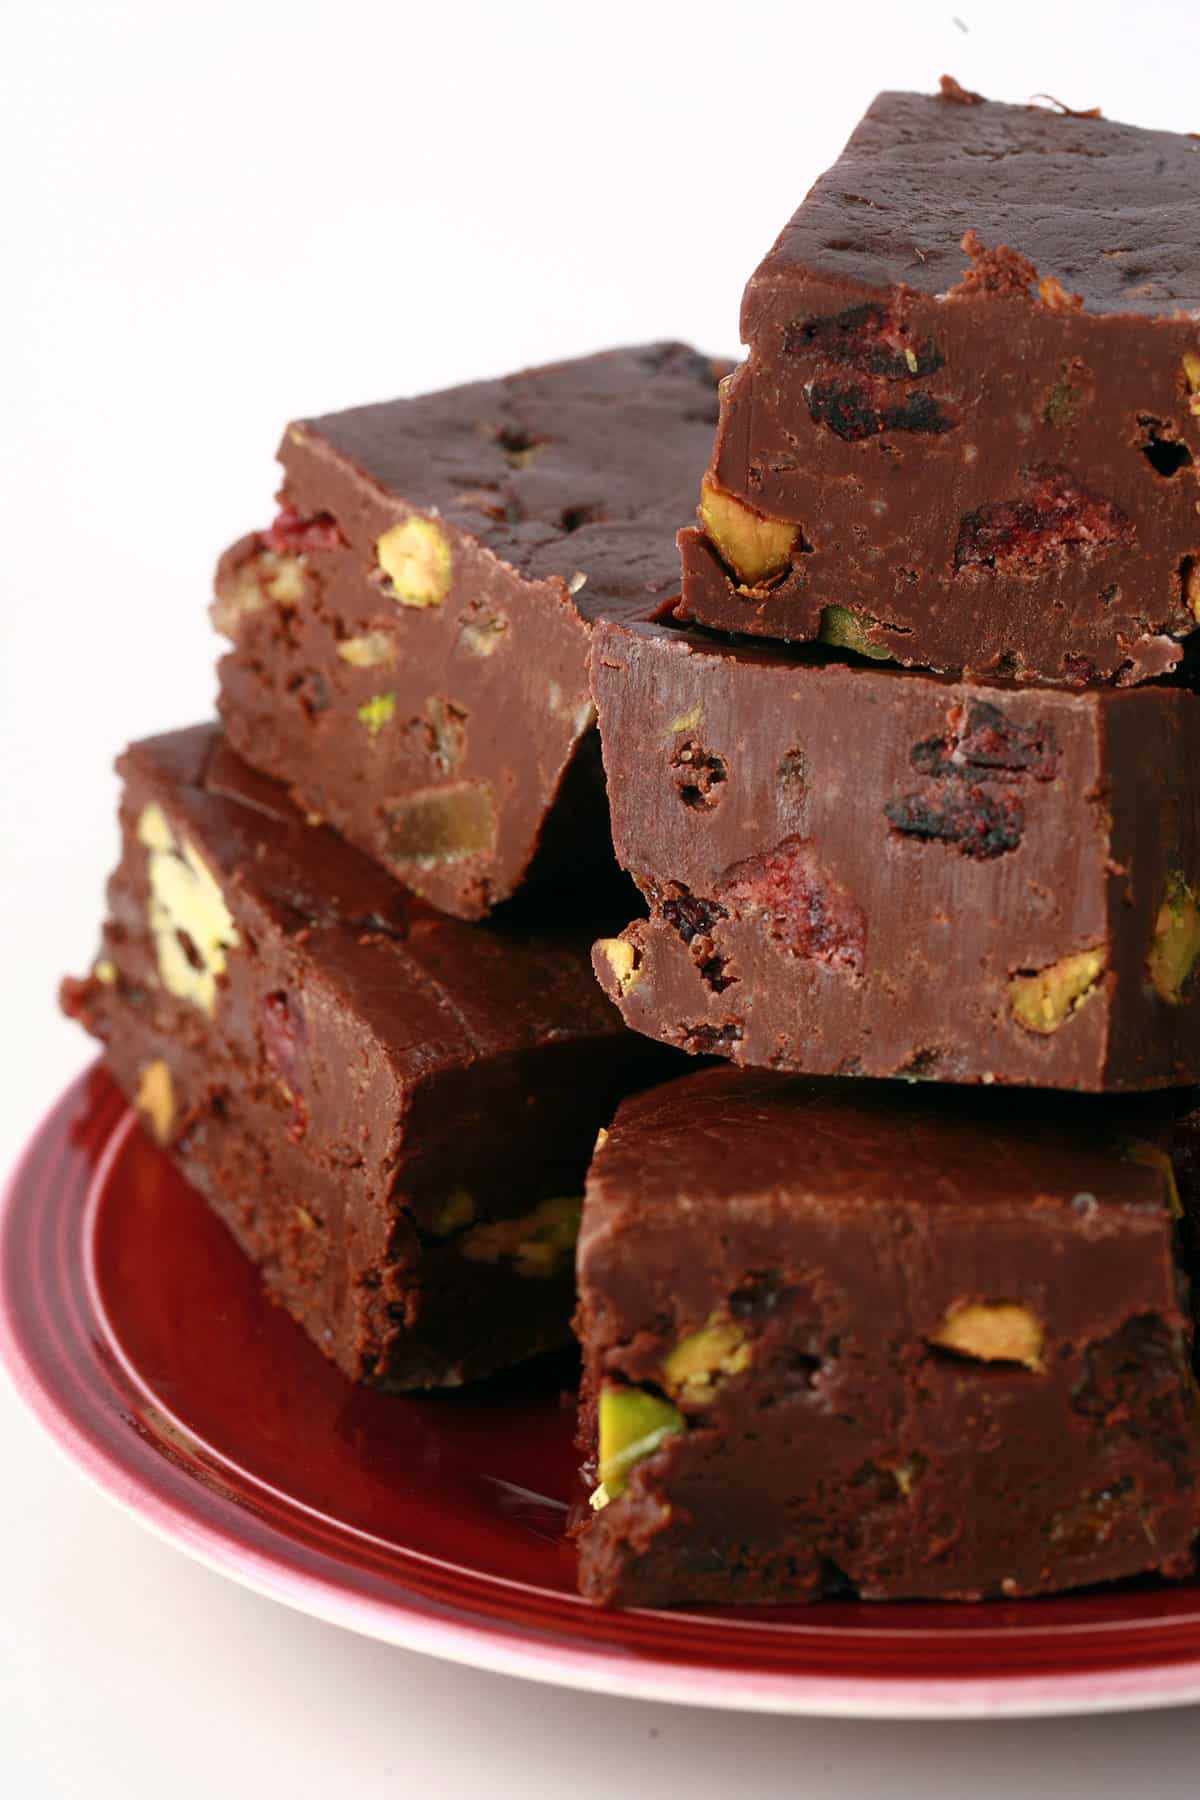 A small stack of festive holiday fudge on a plate.